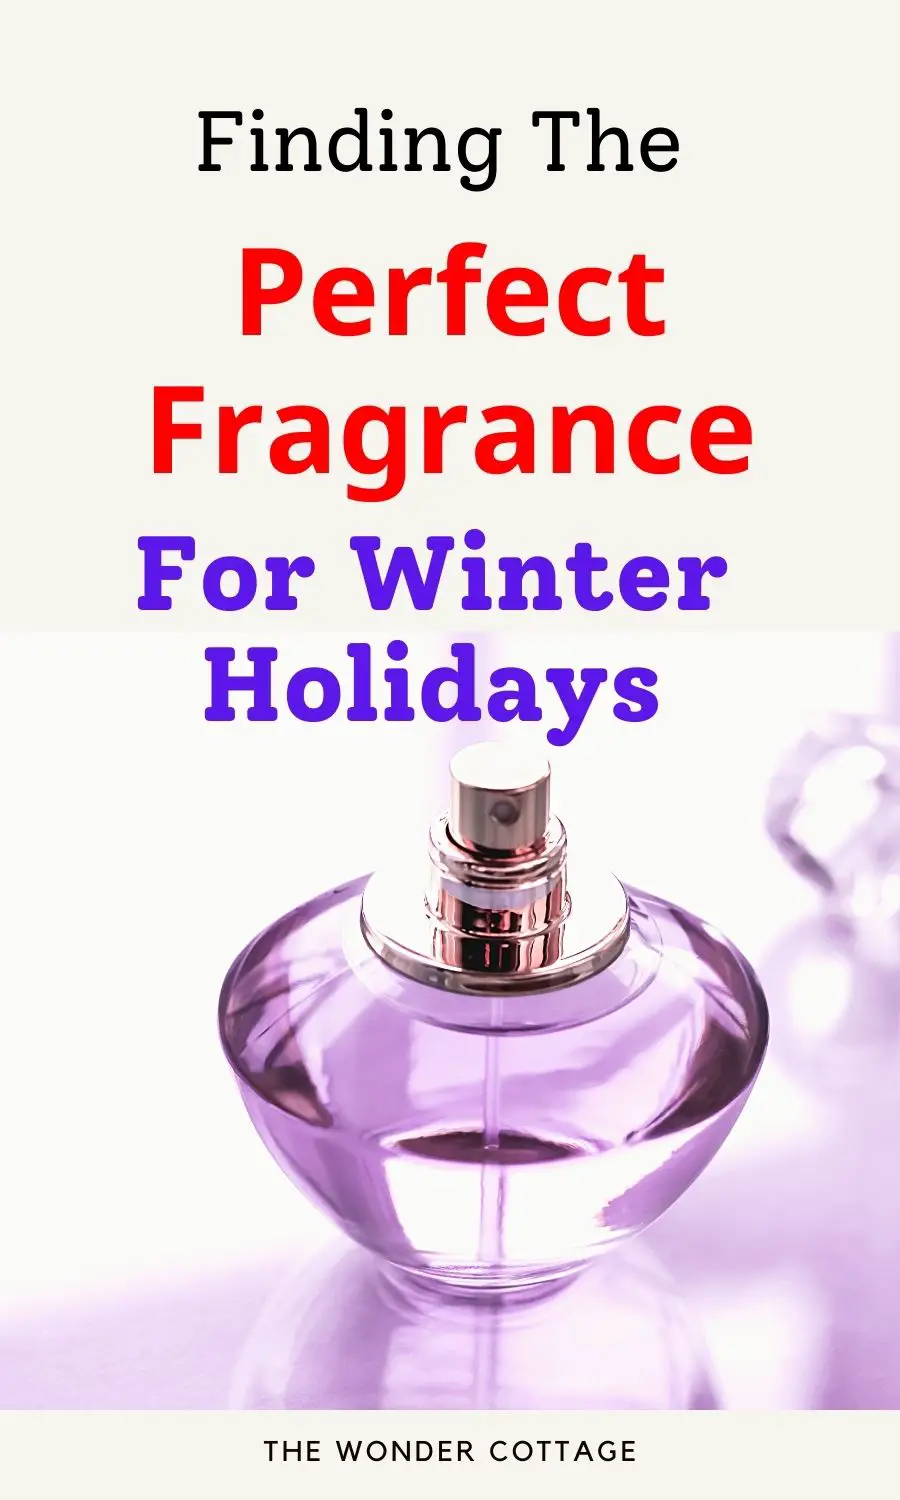 Finding The Perfect Fragrance For Winter Holidays